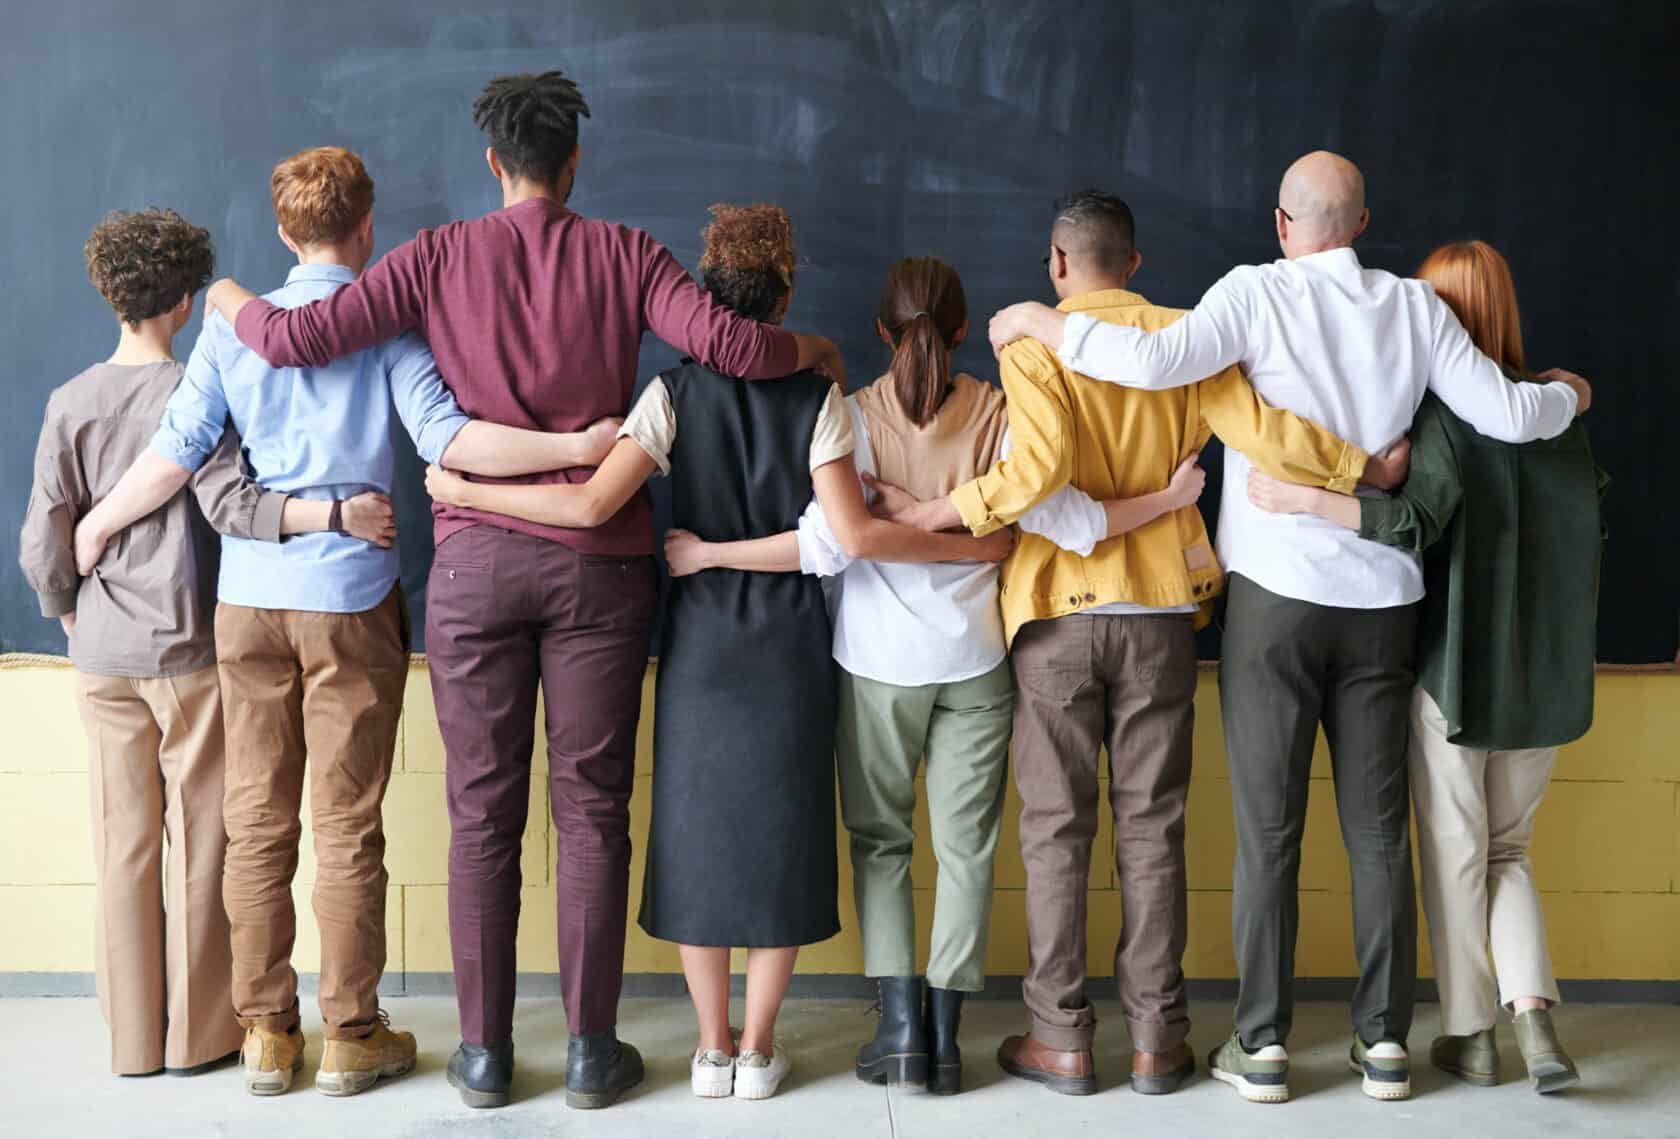 Group of people with their arms around each other.